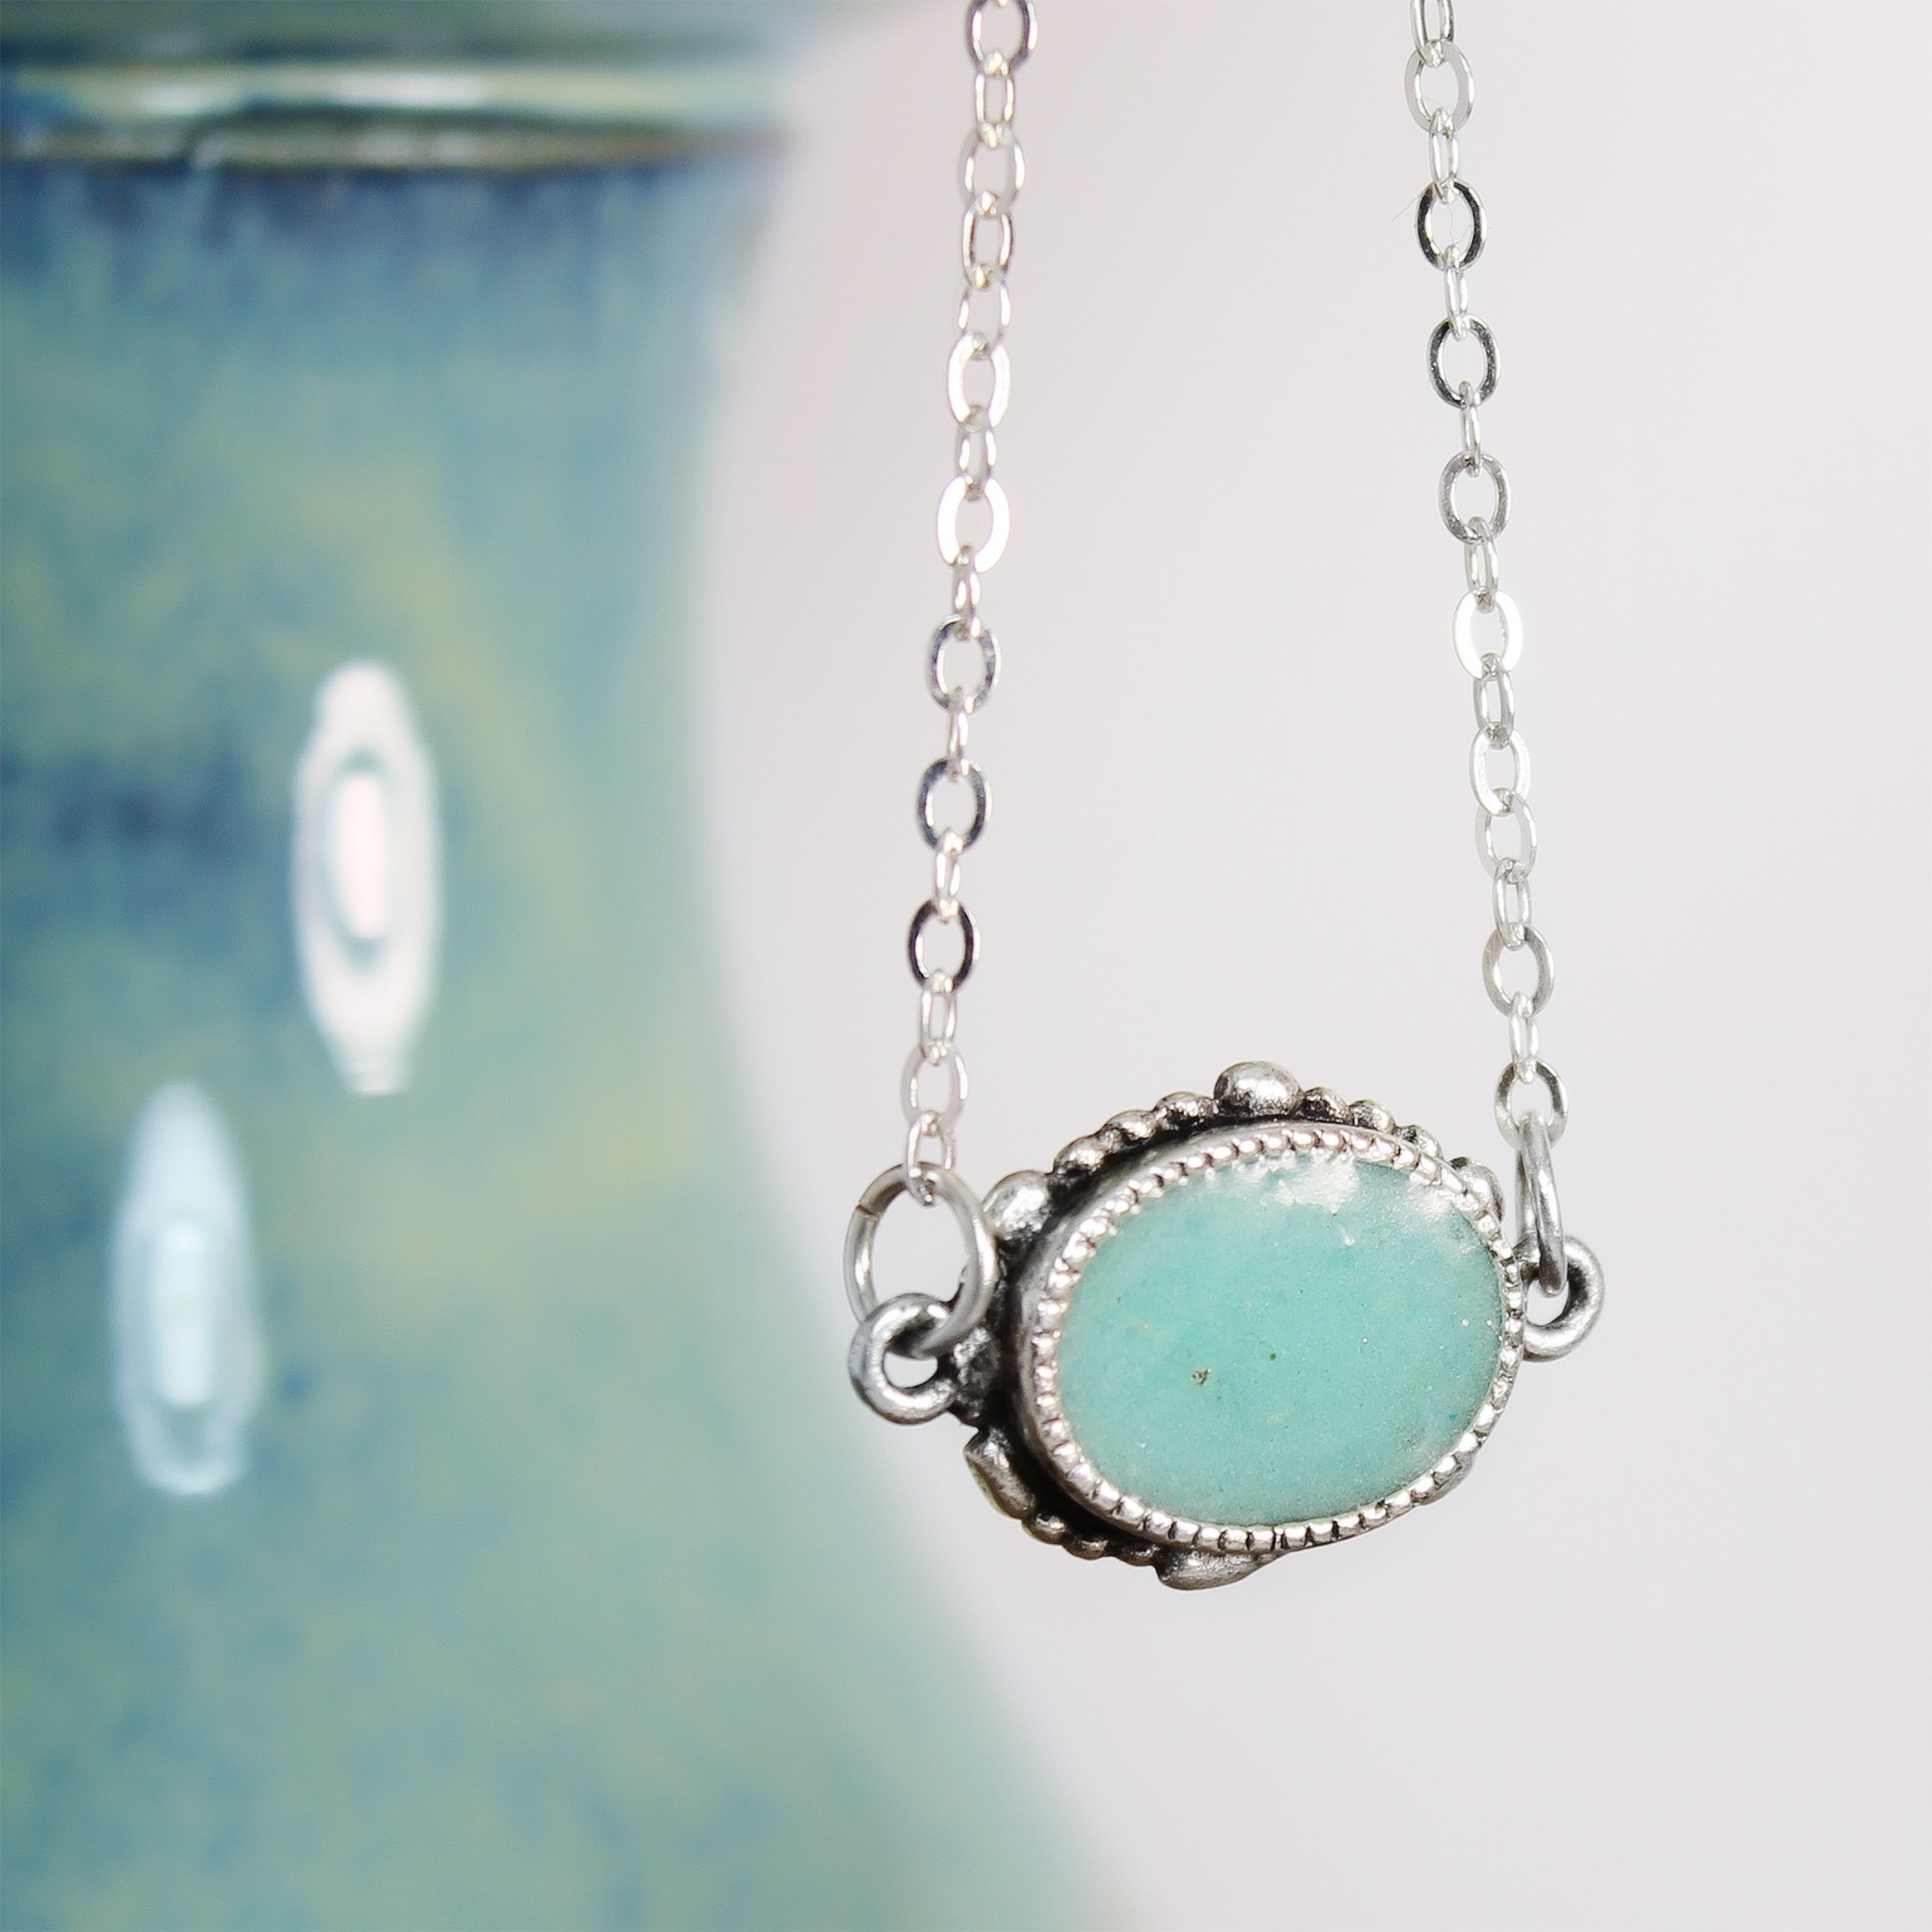 Ornate Turquoise Necklace Metaphysical Jewelry & Gifts